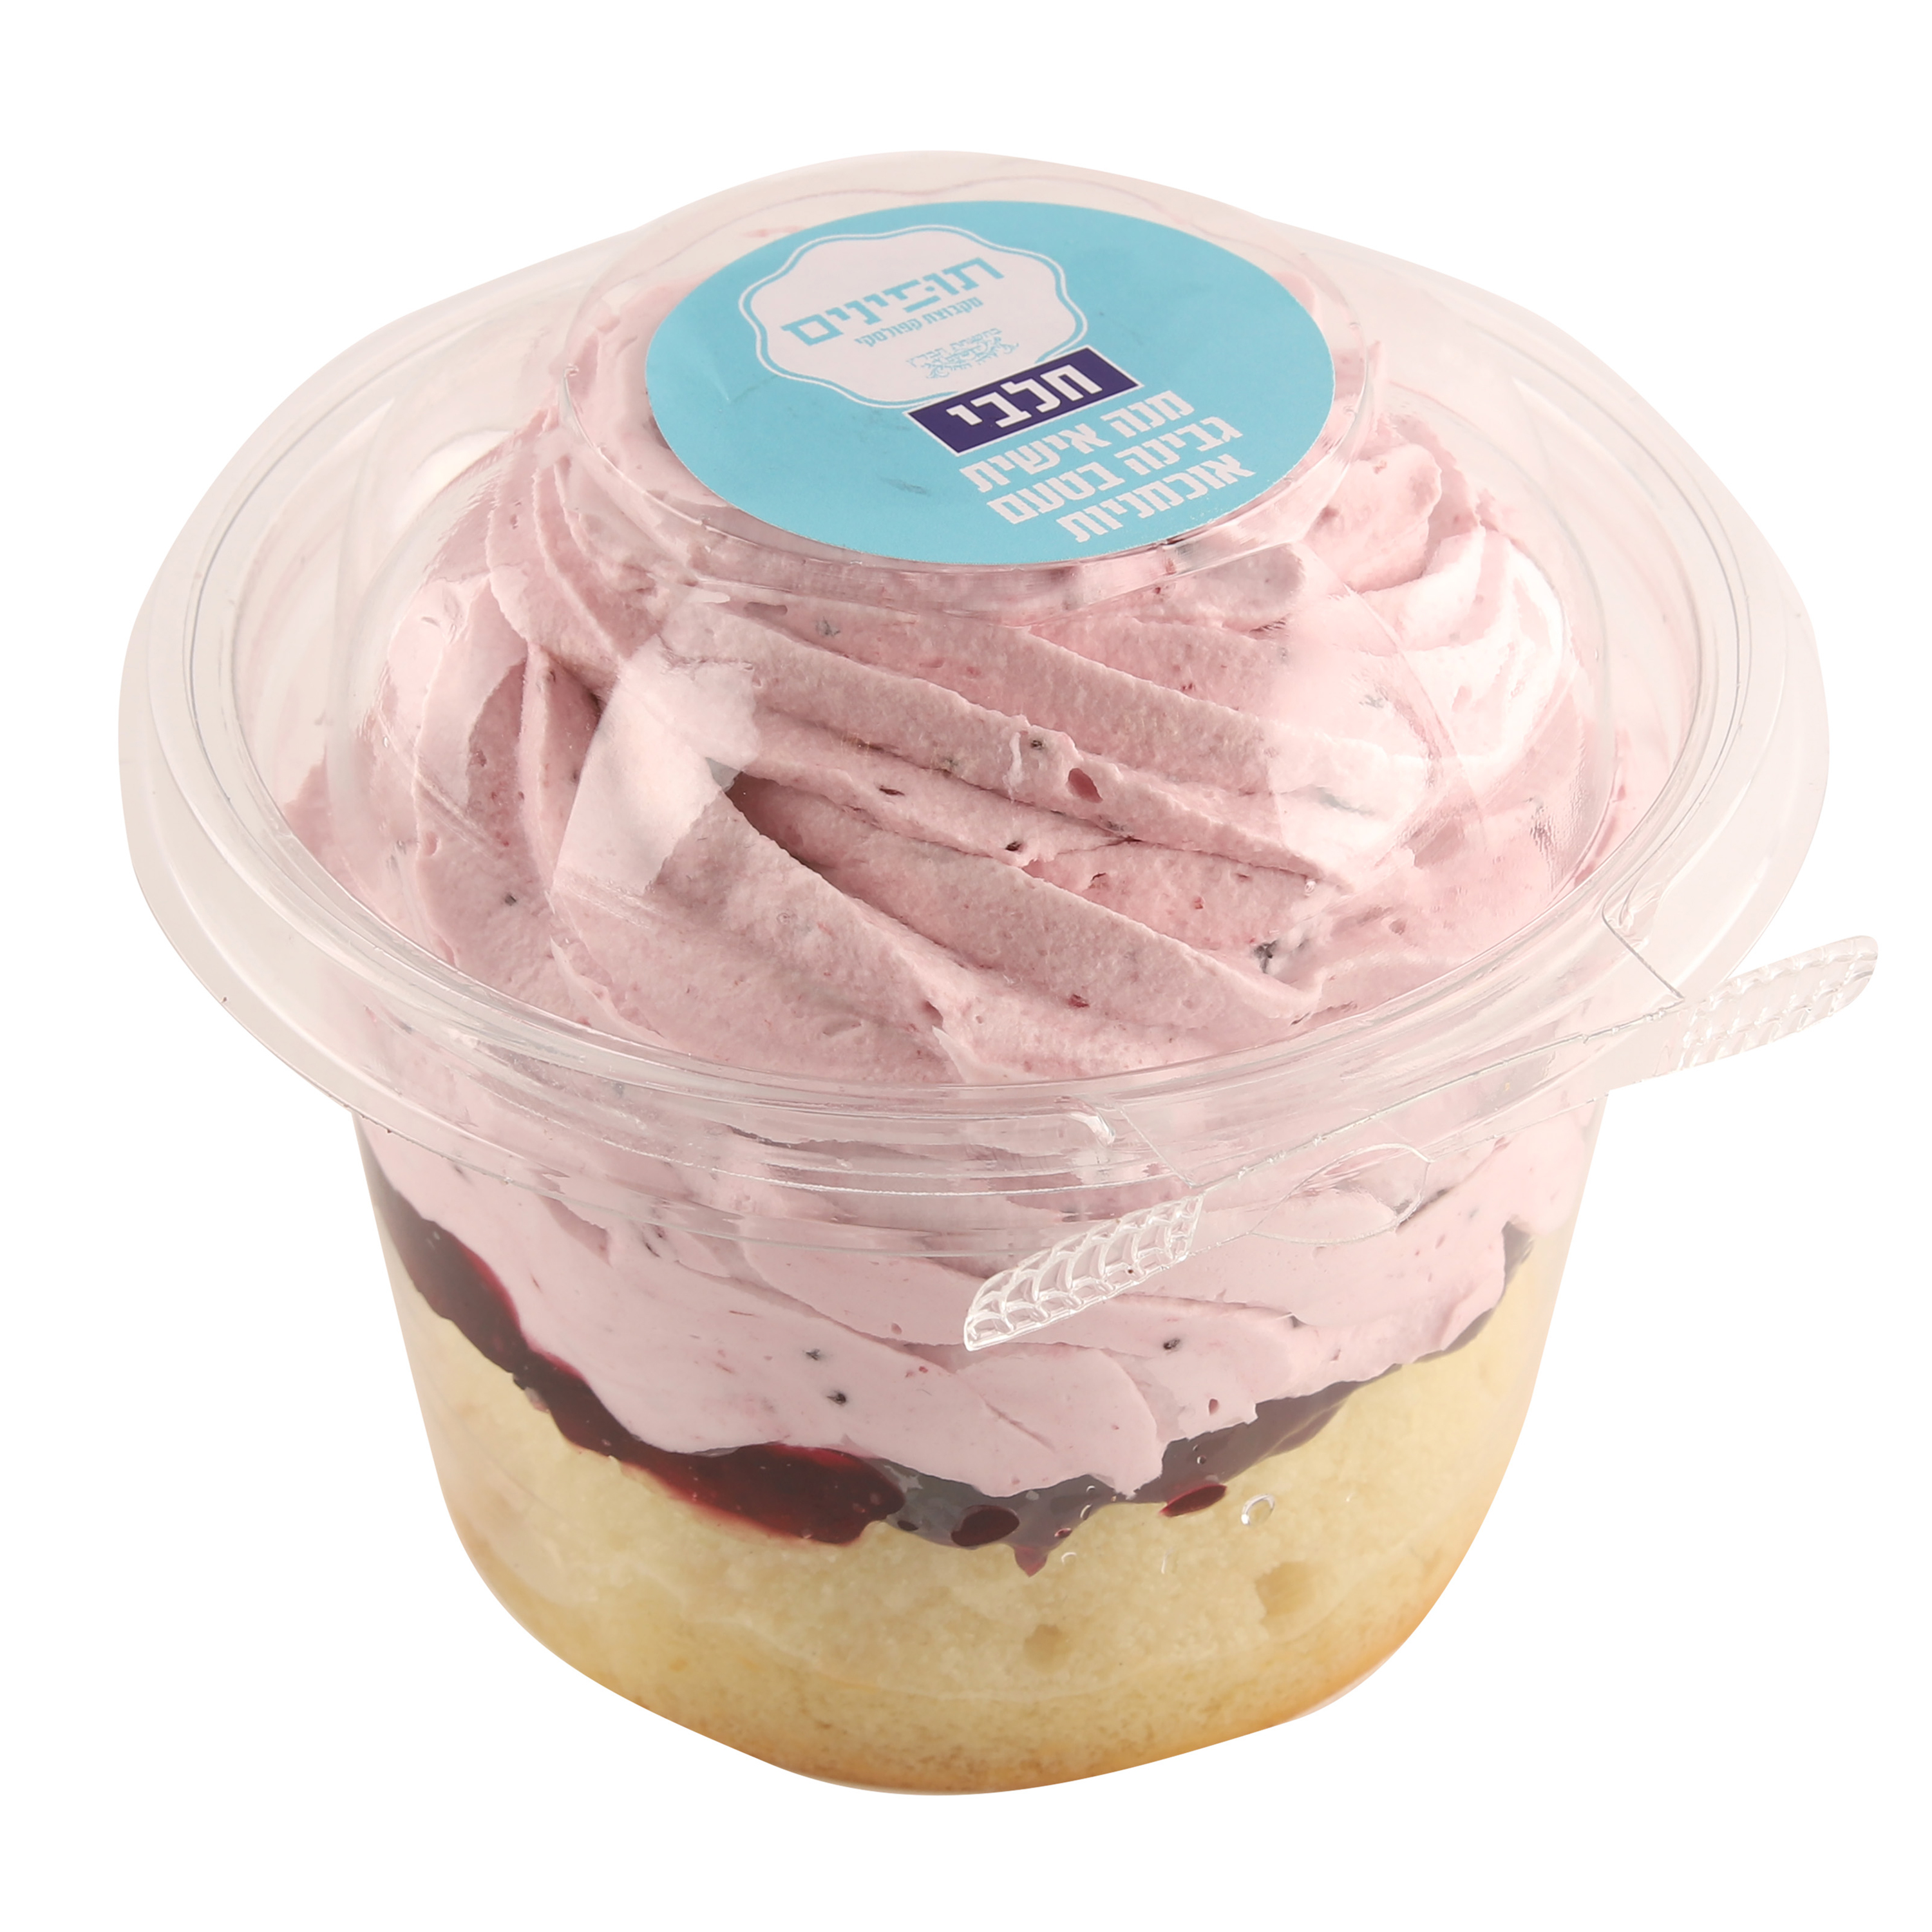 Blueberry and Cream Cheese Frosting 200g